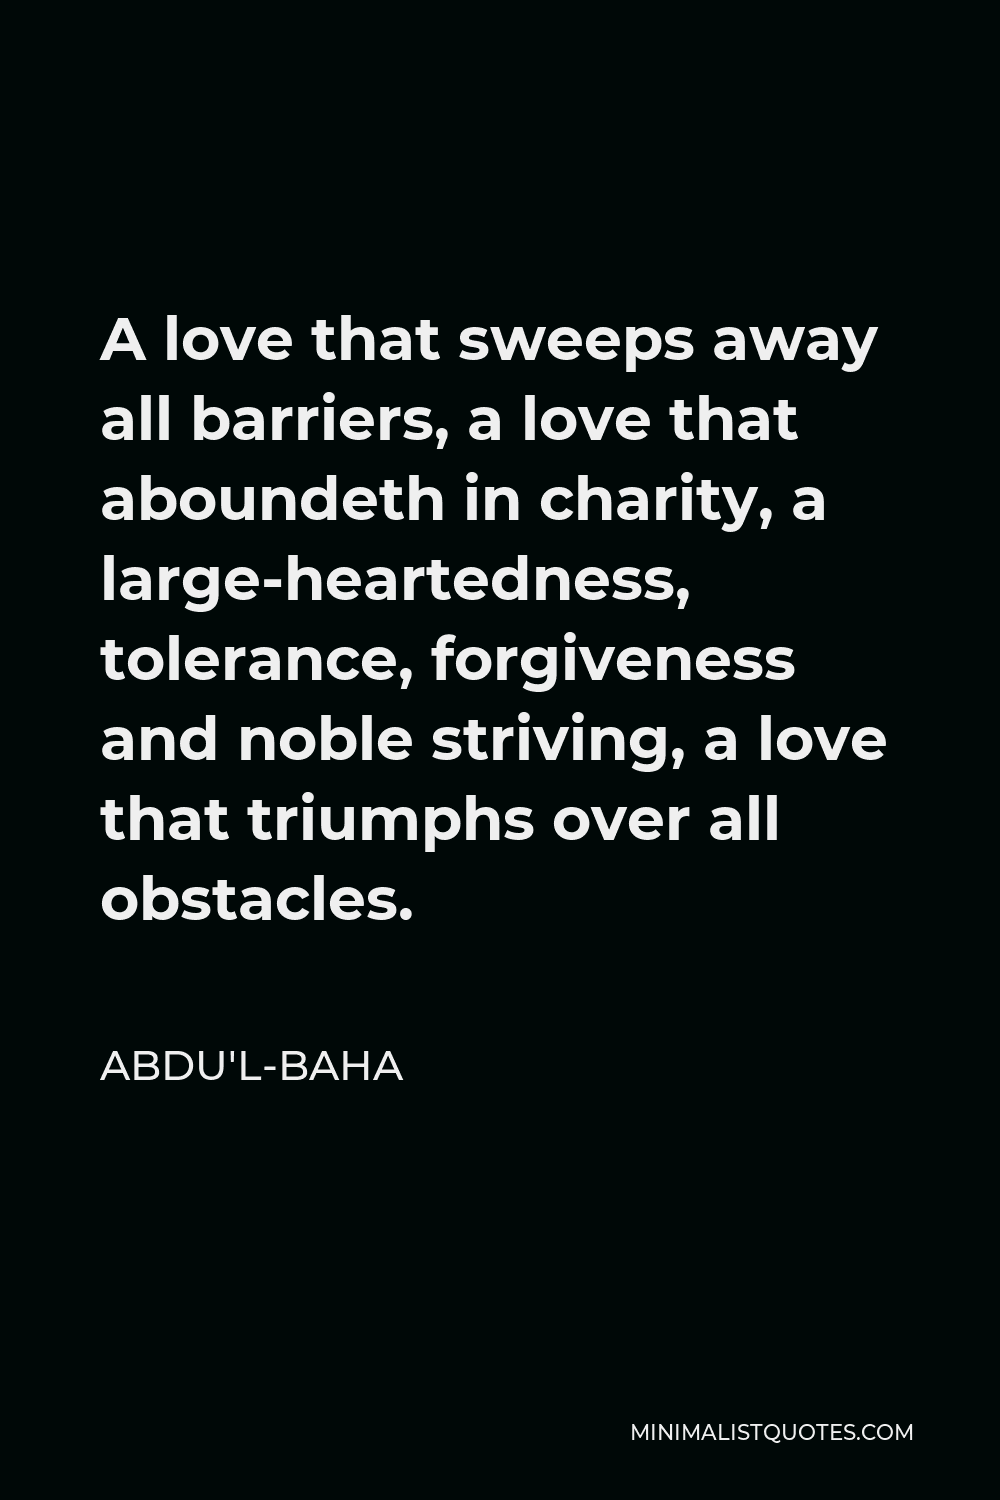 Abdu'l-Baha Quote - A love that sweeps away all barriers, a love that aboundeth in charity, a large-heartedness, tolerance, forgiveness and noble striving, a love that triumphs over all obstacles.